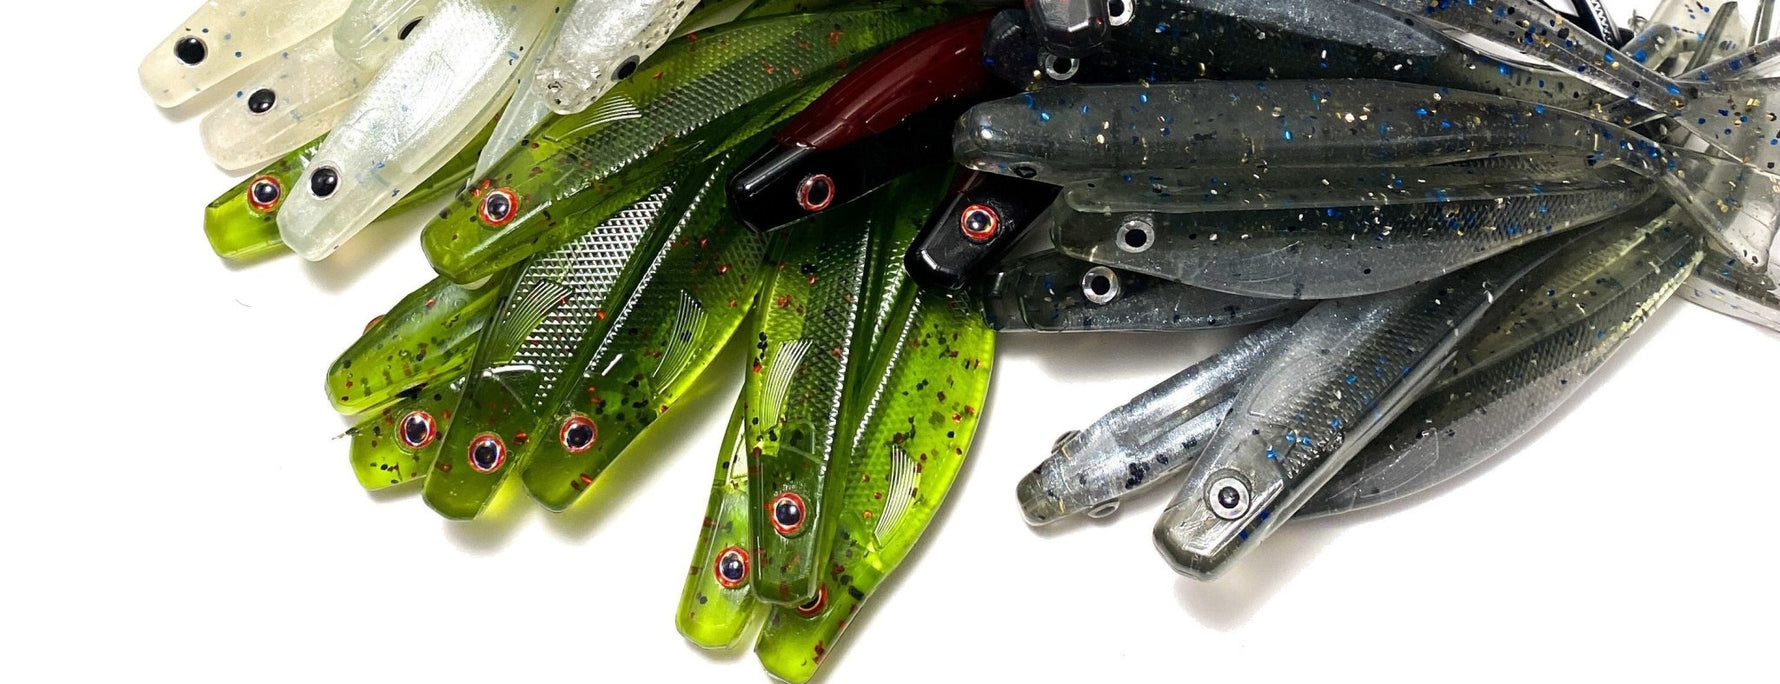 Soft Plastic Jerkbait (fluke) Tips and Tricks you Need to Know - Obee Fishing Co.